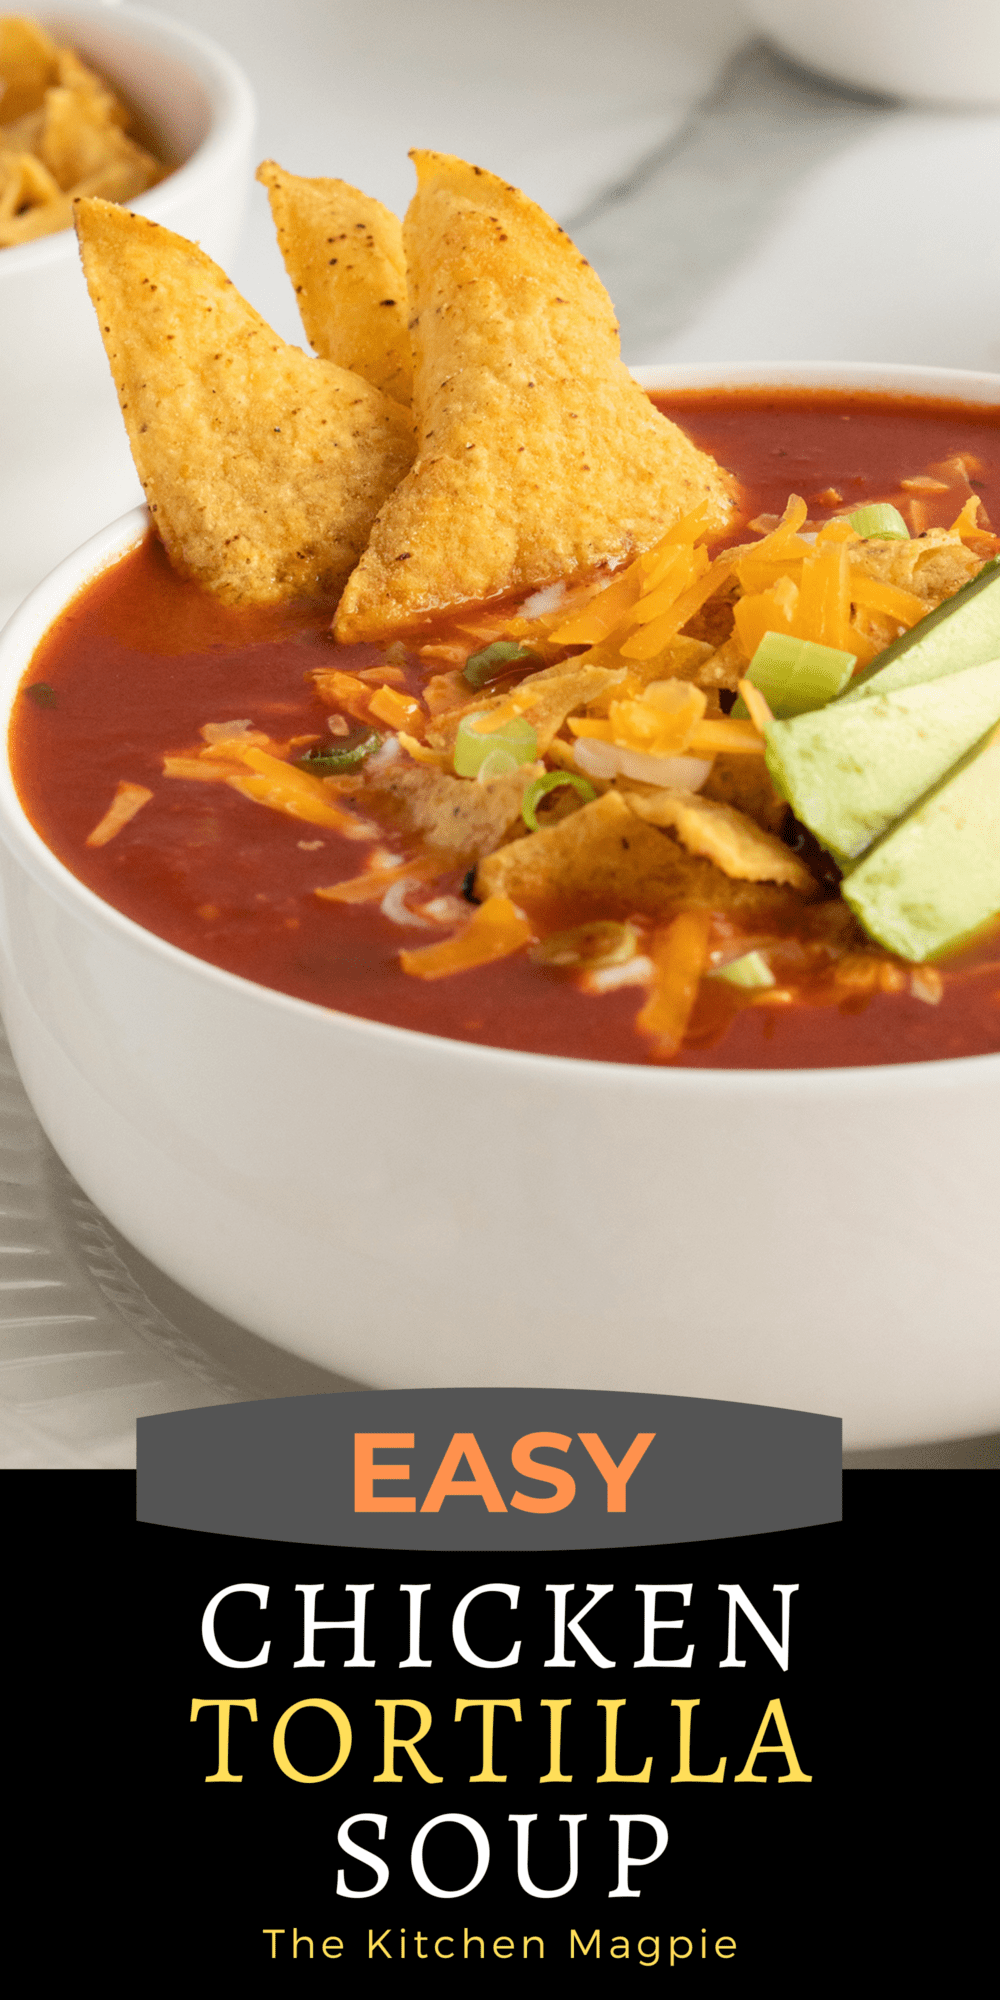 Tortilla chips, simply cooked chicken, corn, and beans all cooked together in a warming tomato broth – what's not to like?